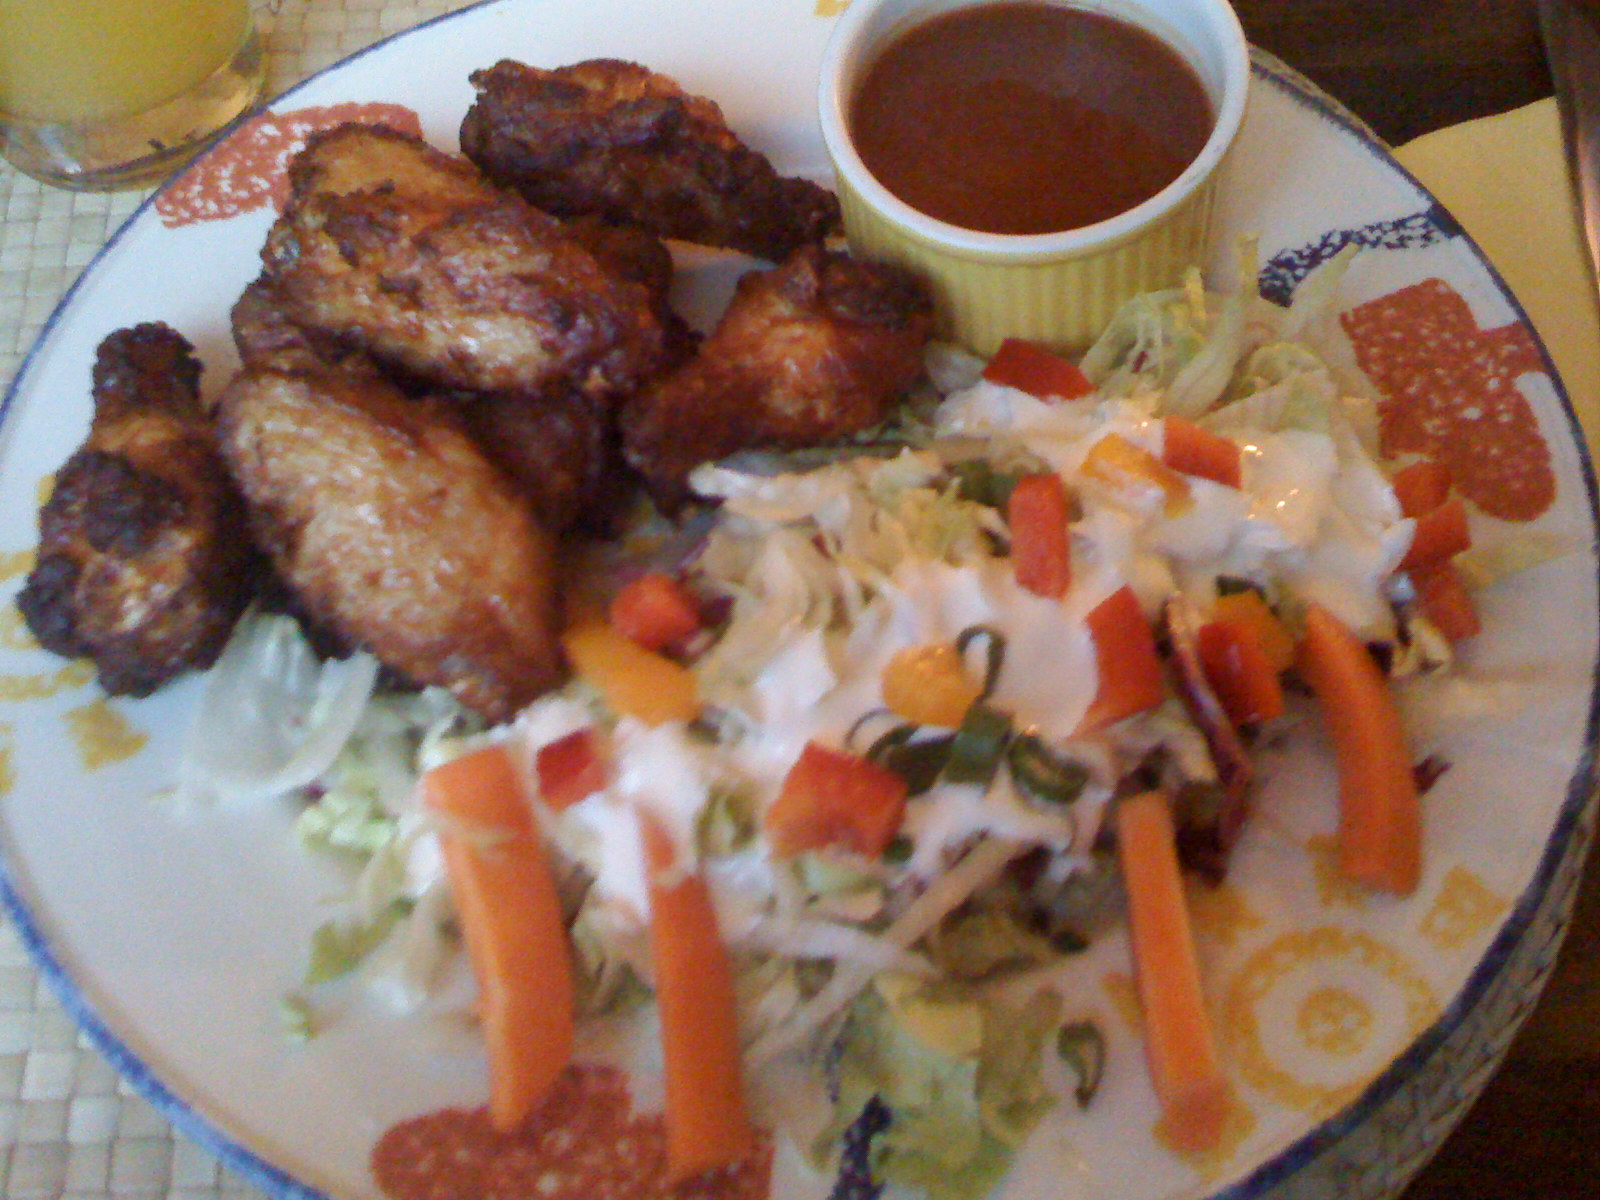 a dinner plate with carrots, coleslaw and fried chicken